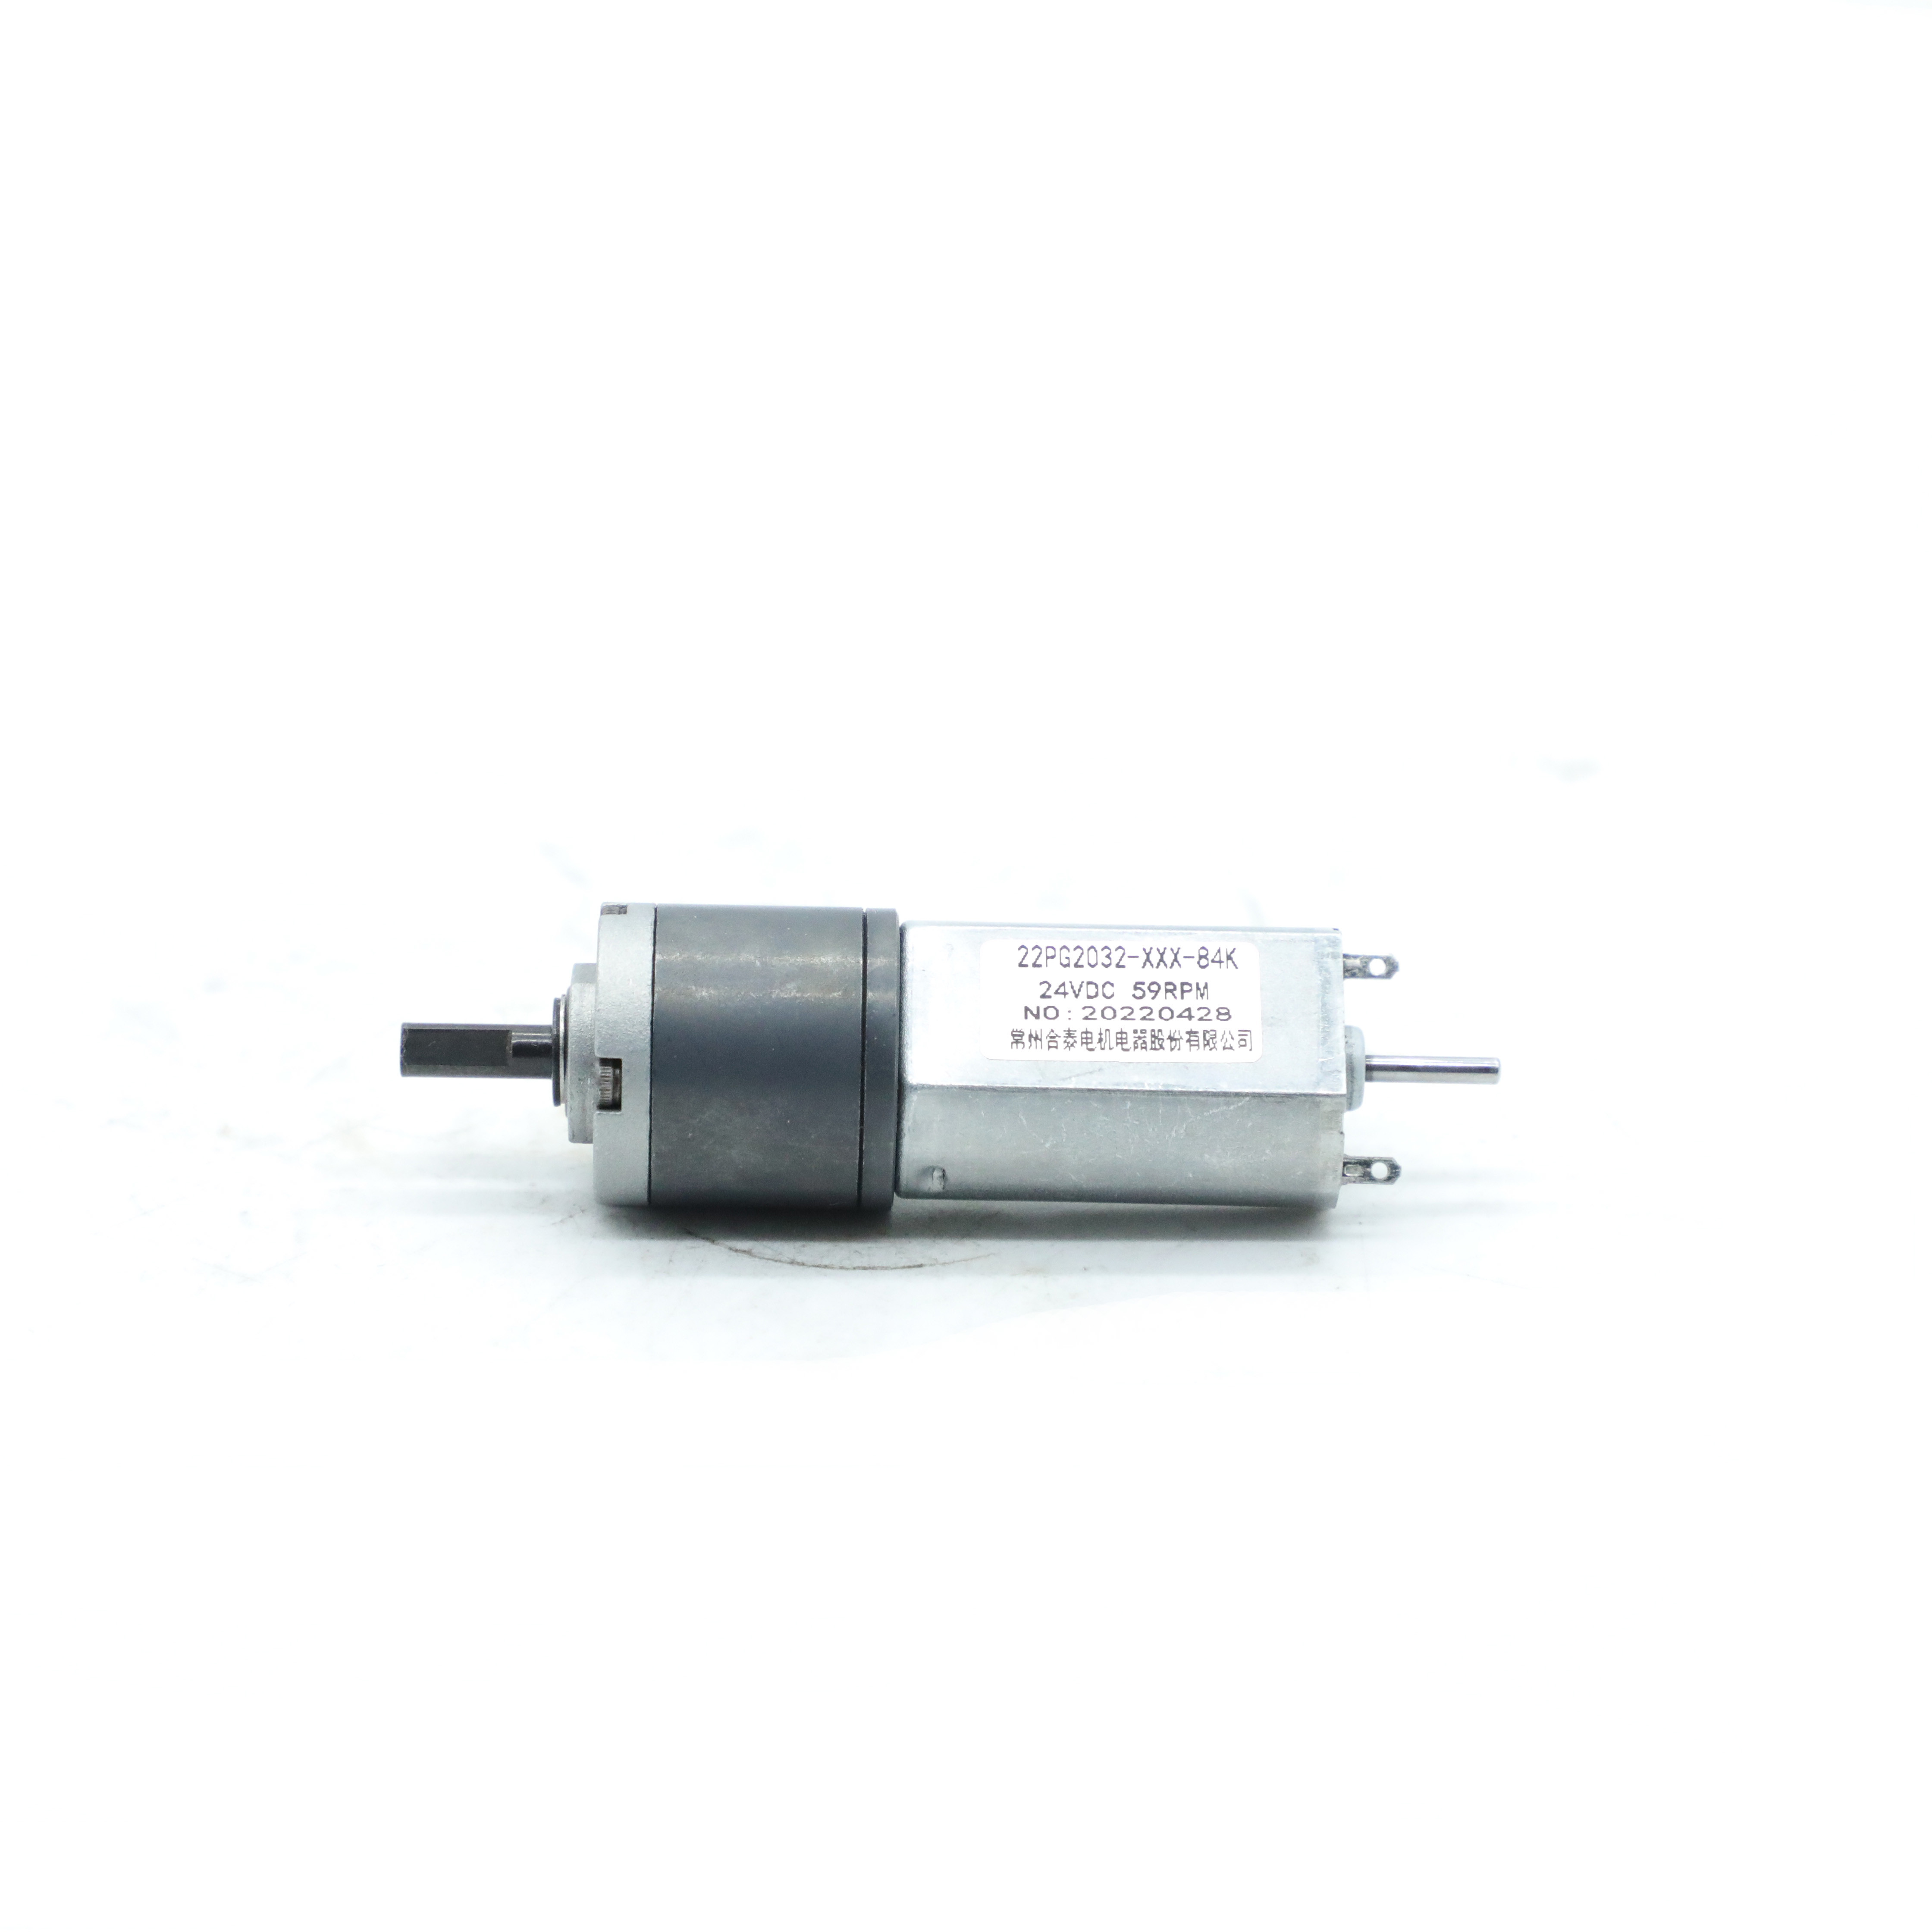 Buy NEMA 8 Low Noise DC Brush Gear Motor 24V 59 Rpm 0.05A 22mm at wholesale prices